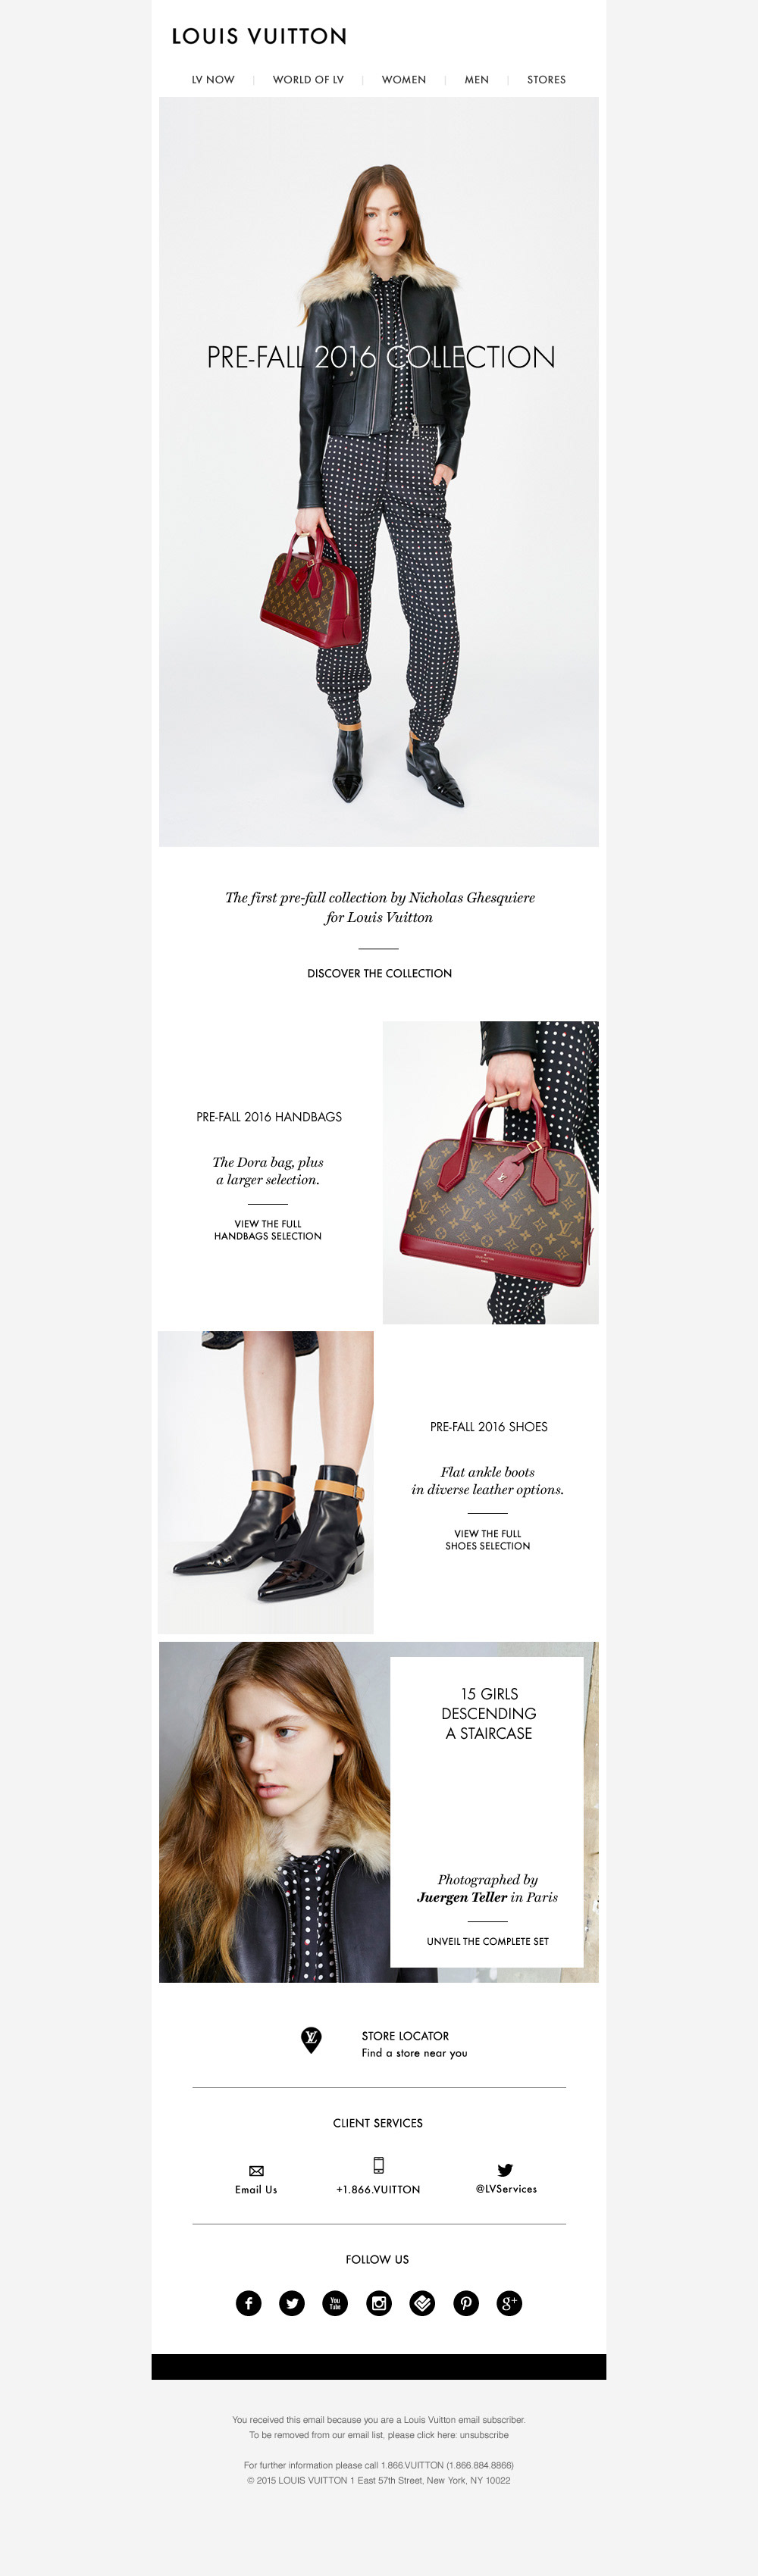 Actual emails sent out by Louis Vuitton using the new templates